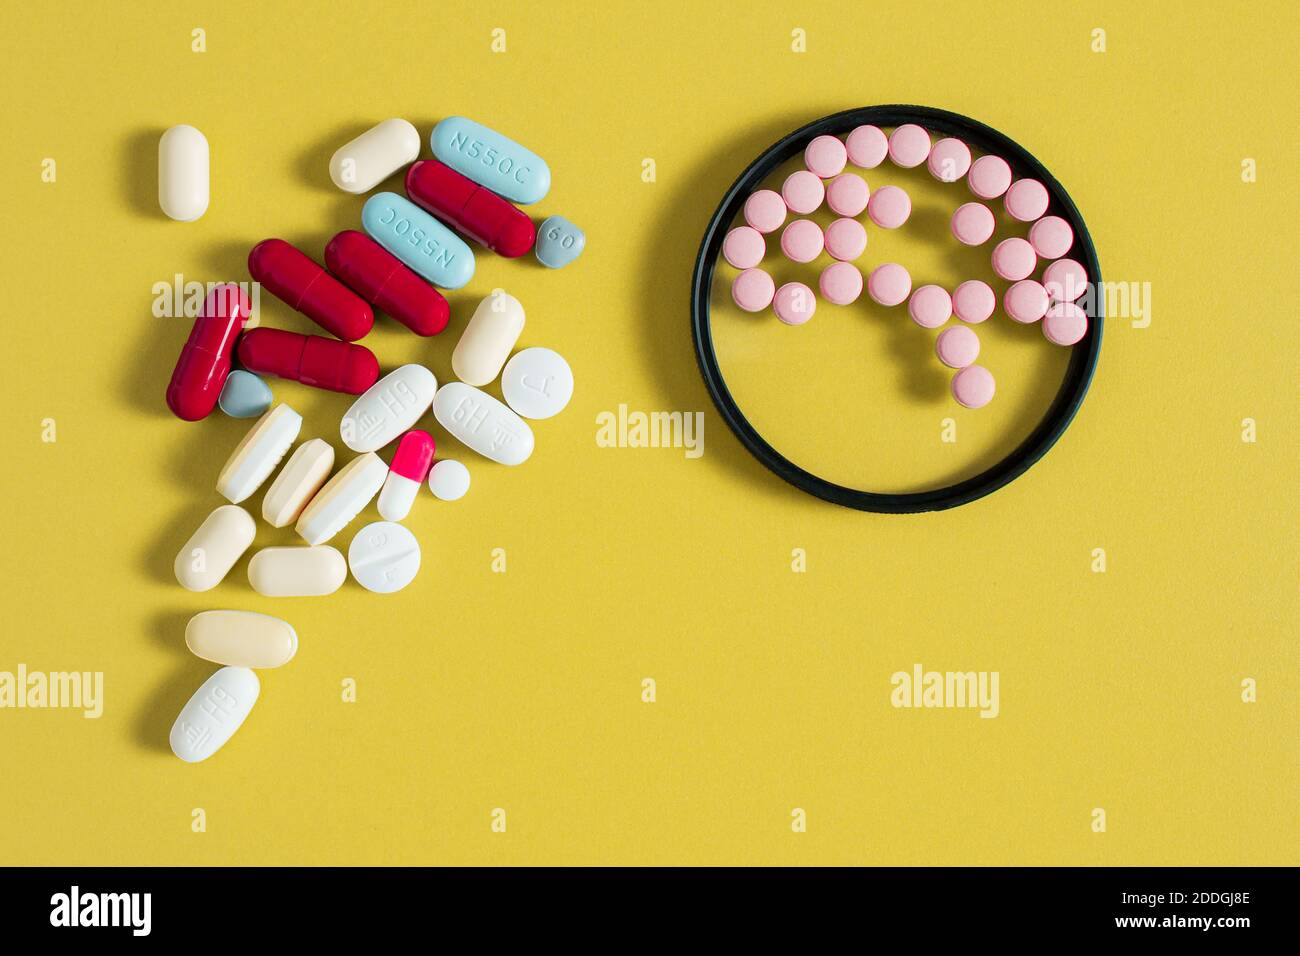 Small round pills simulate brain shape inside a circle and a bunch of different medications on a mustard-colored table. Health care concept. Stock Photo